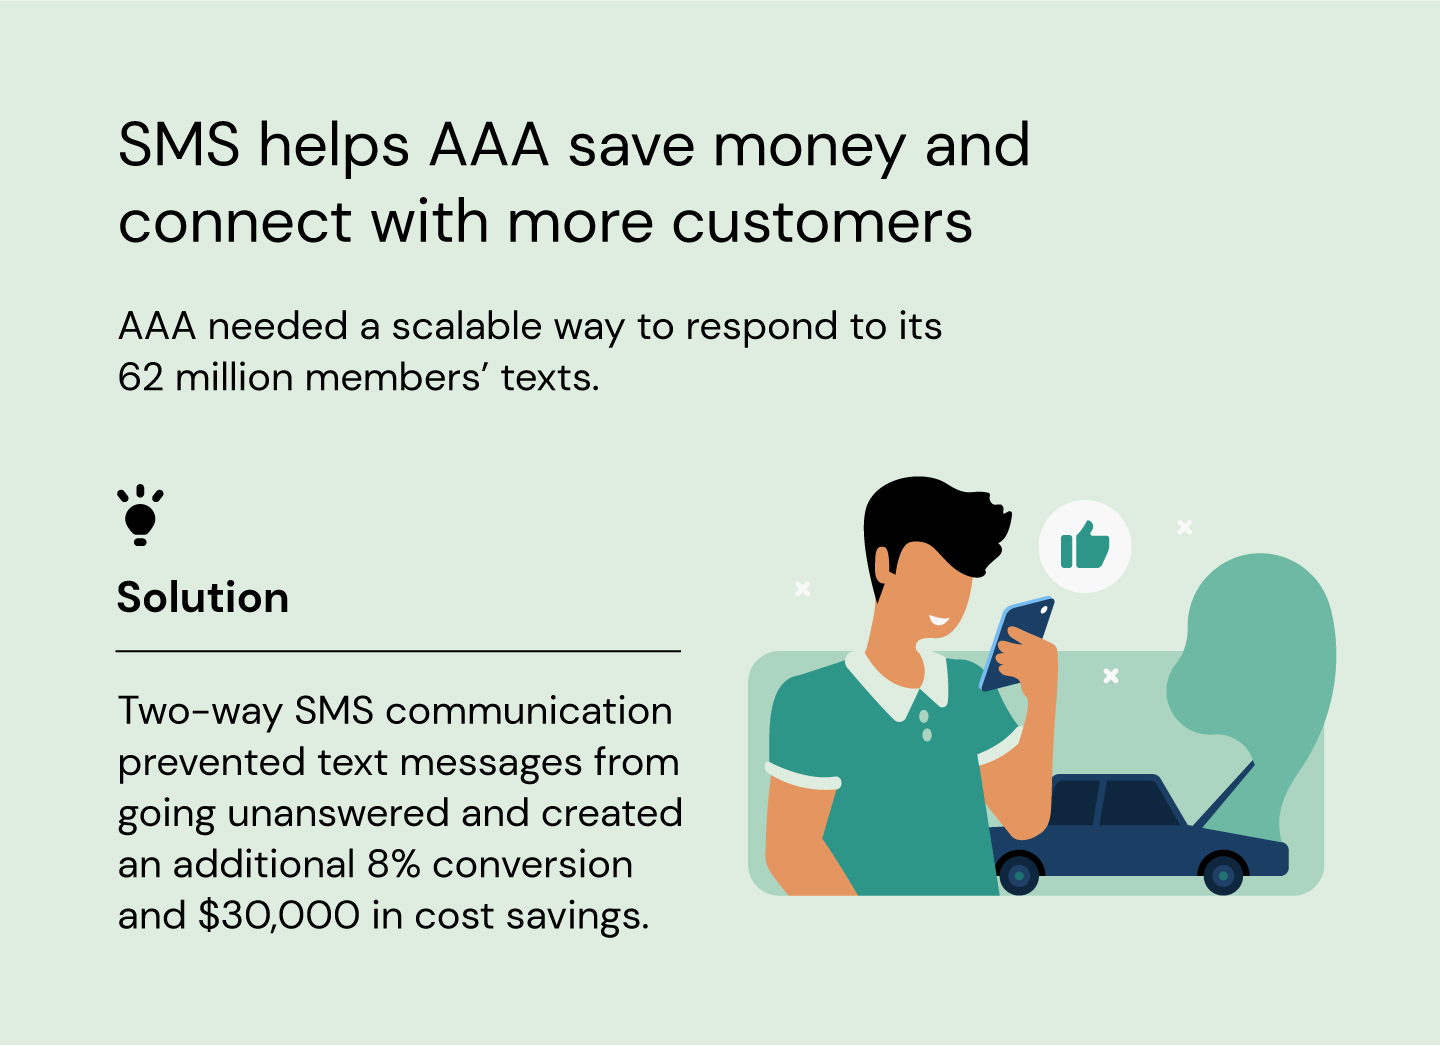 SMS helps AAA save money and connect with more customers. Illustration on a green background shows a user engaging with a mobile device, with a broken-down car in the background.